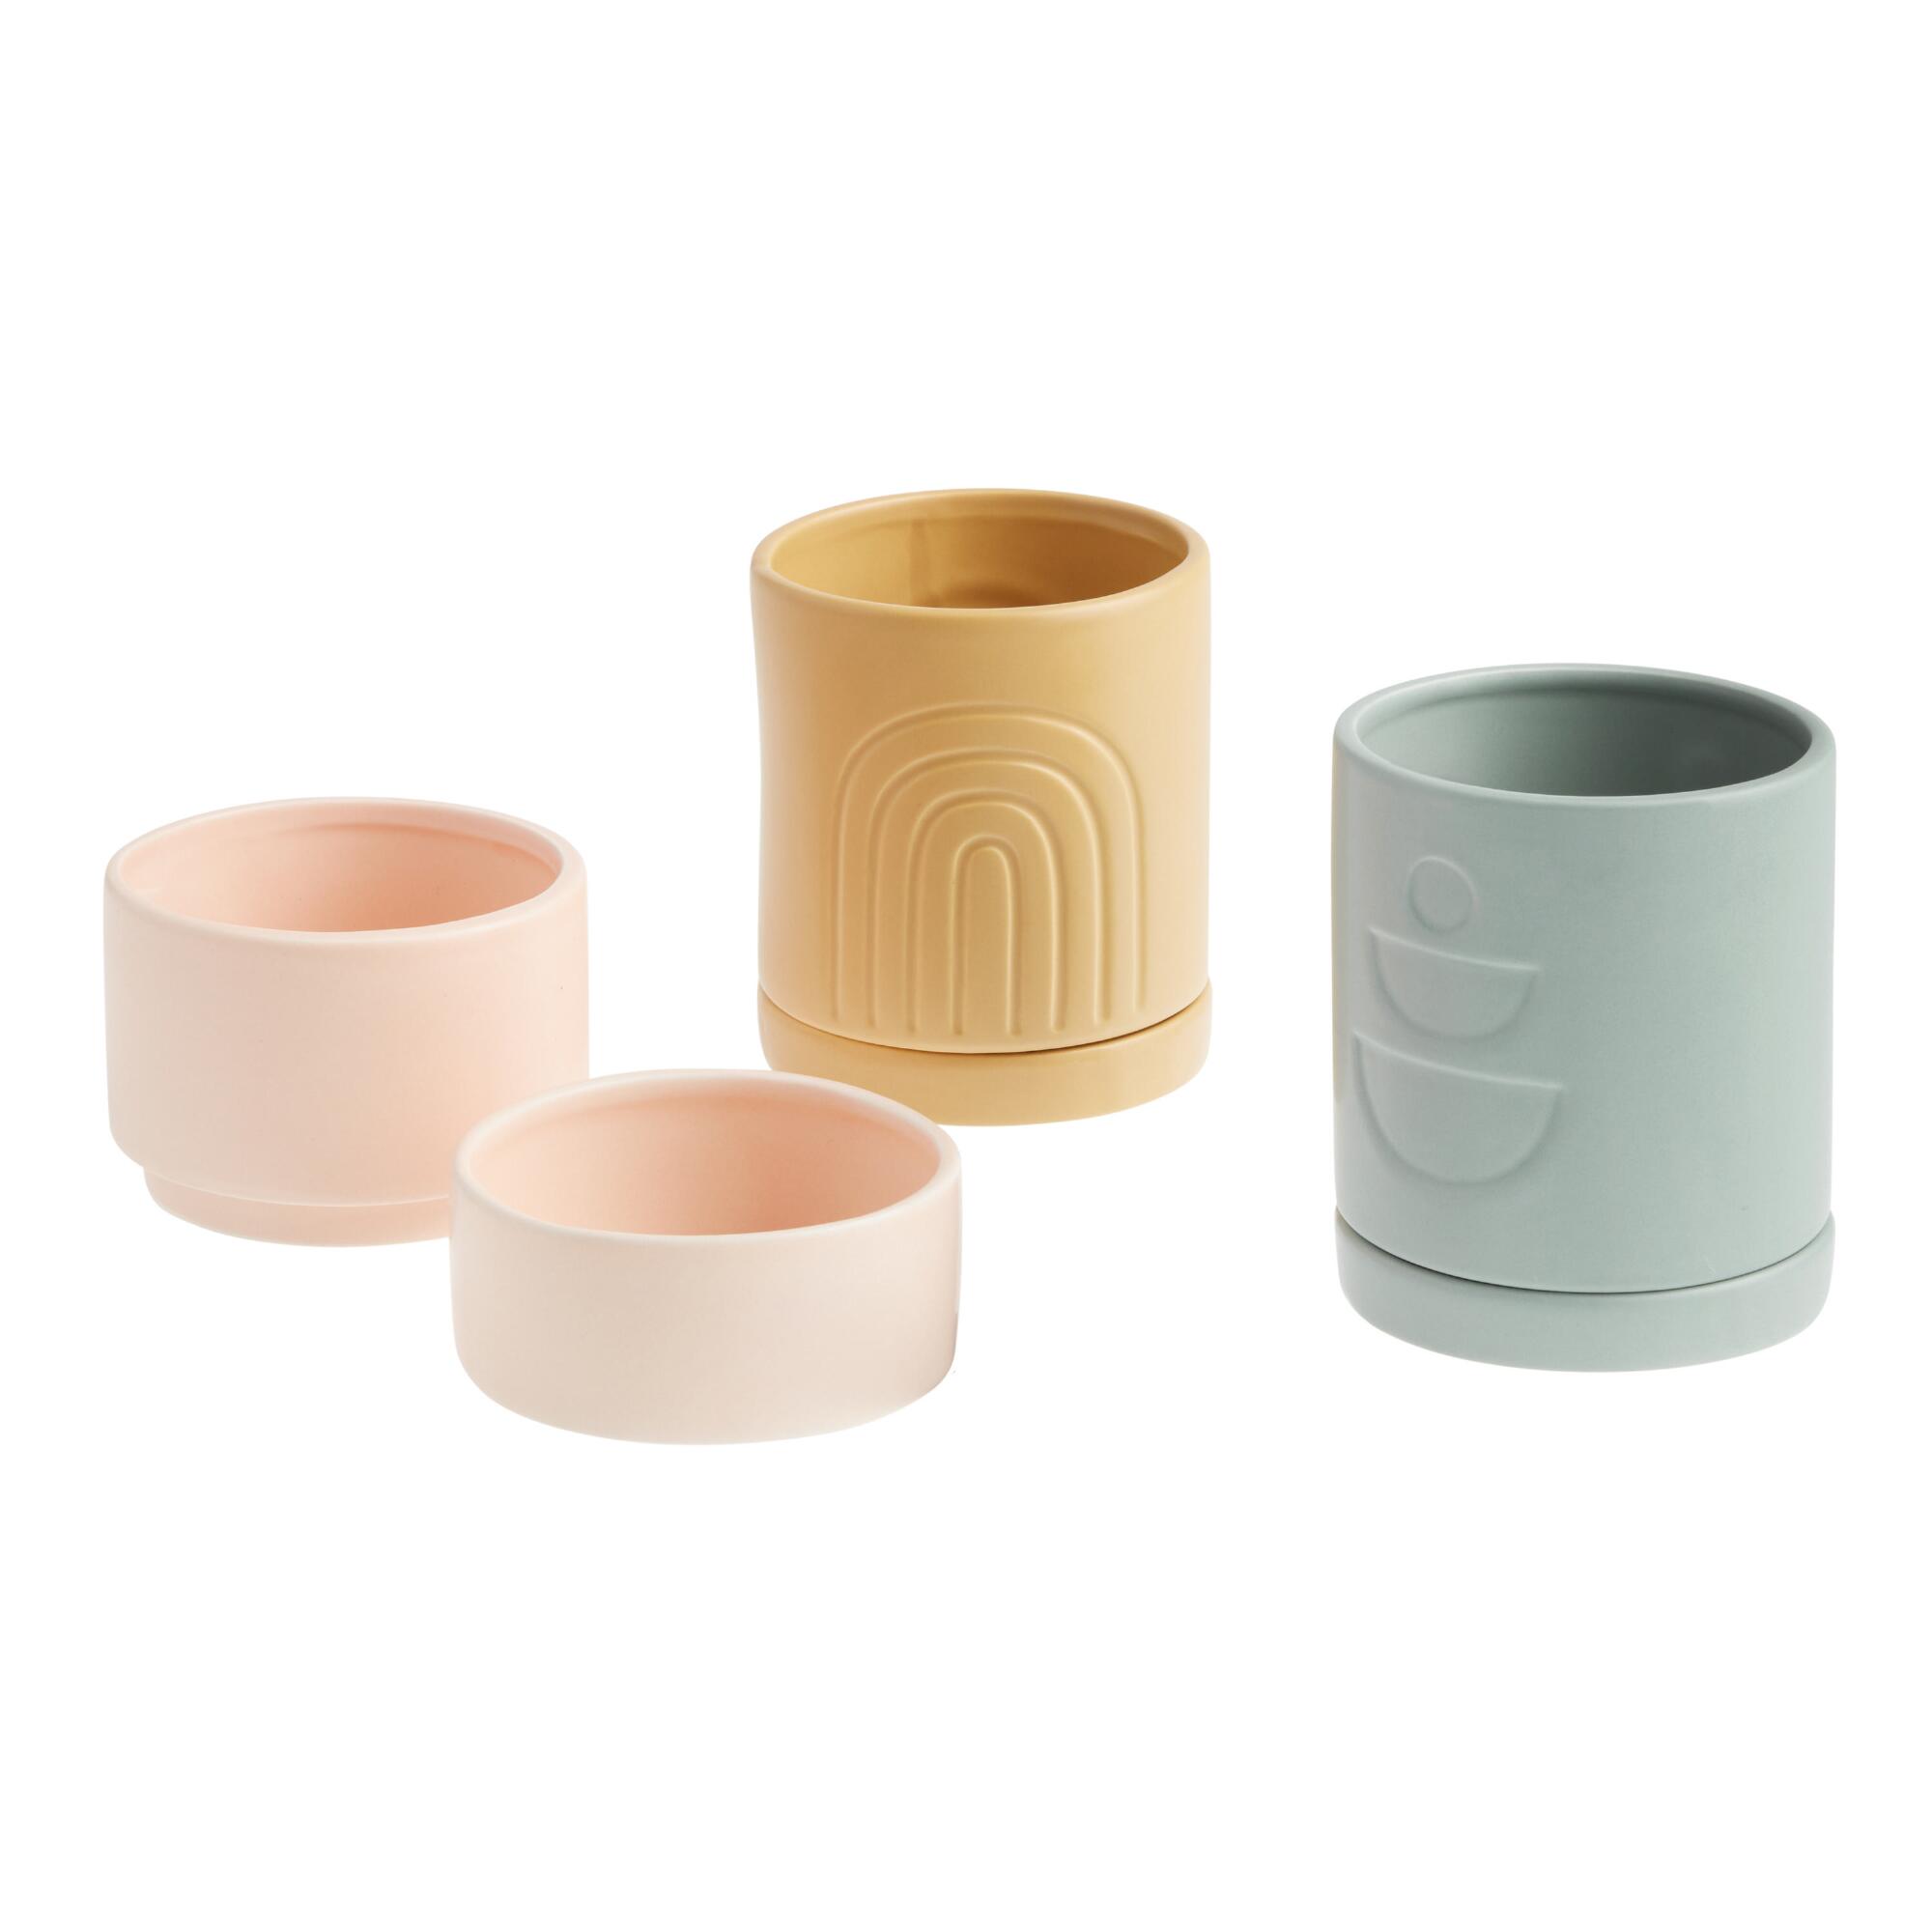 Matte Ceramic Planter With Tray Collection by World Market